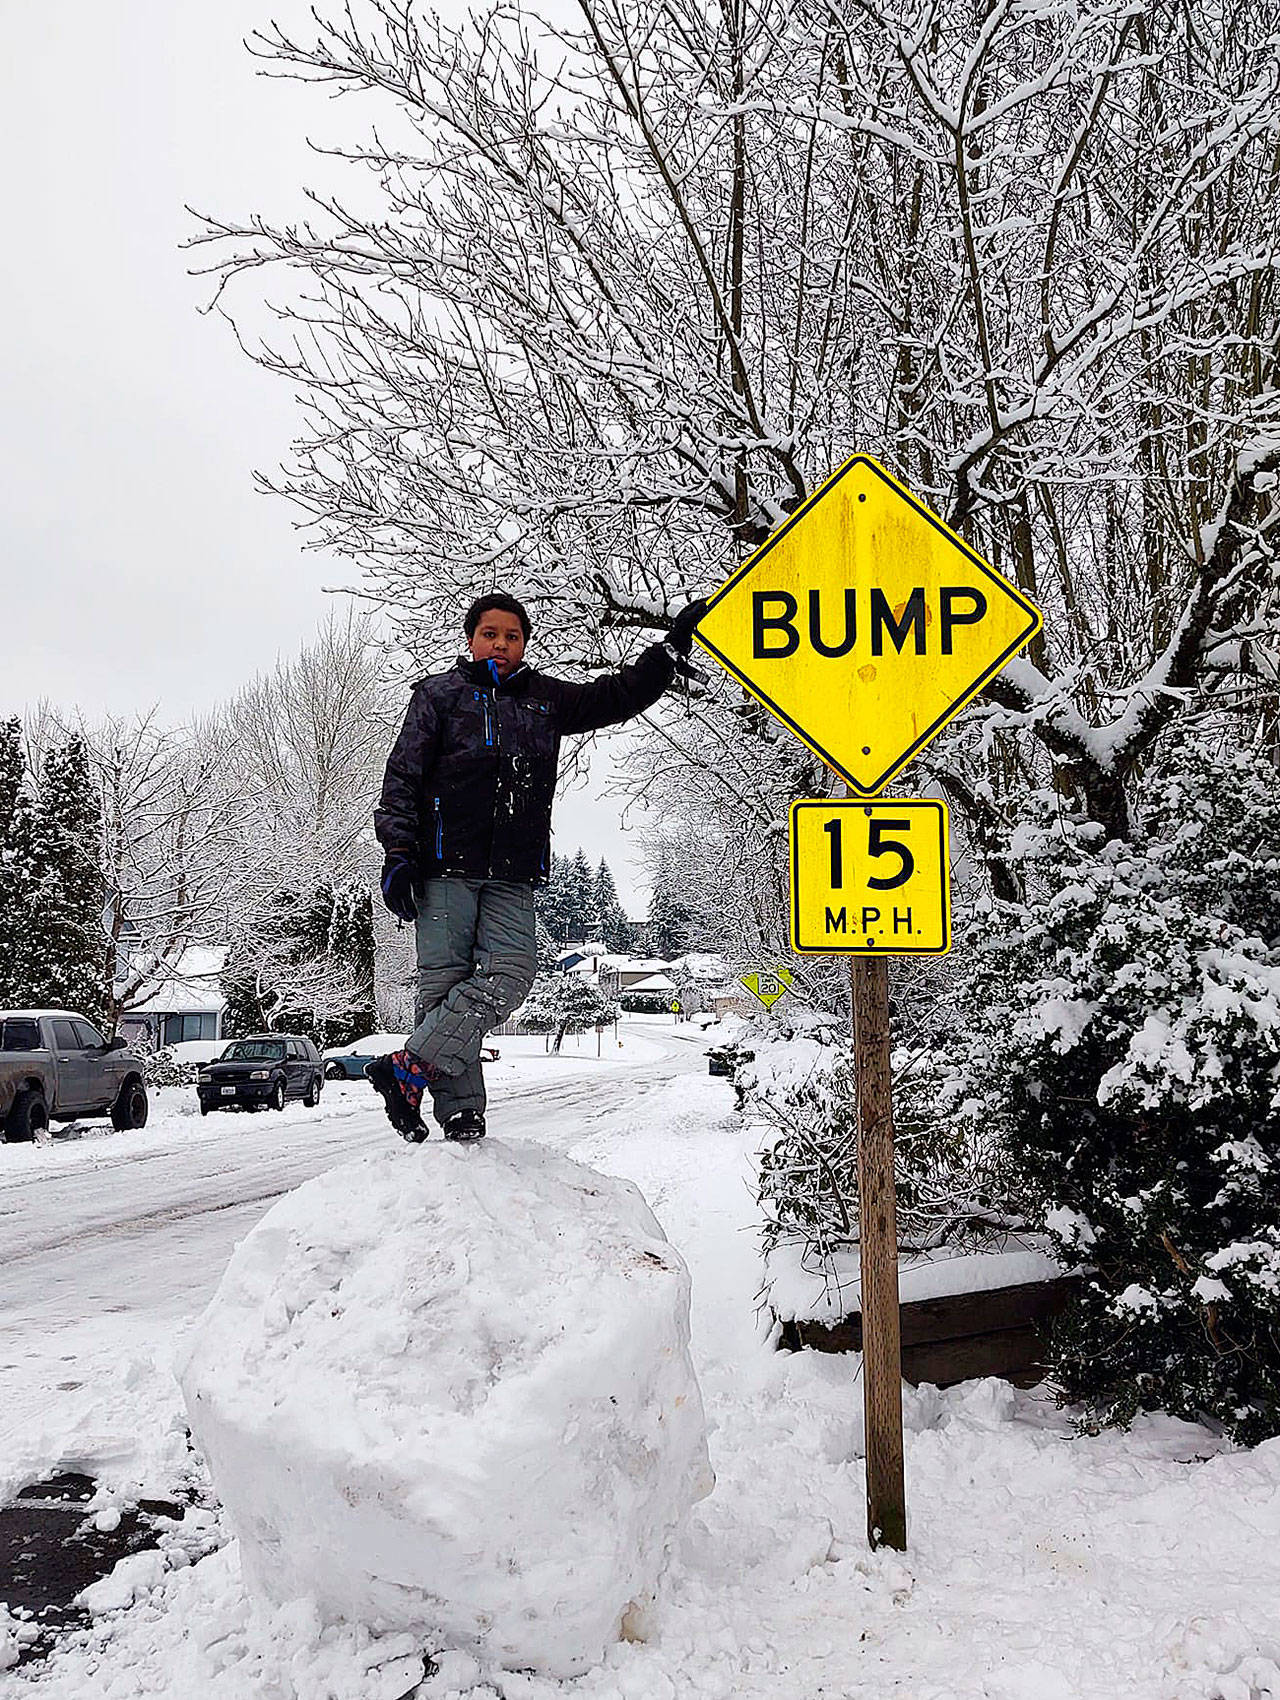 Nine-year-old Aarron Schild stands on top of a massive snowball in Federal Way during last weekend’s snowstorm. Photo courtesy of Kari Sandstrom Schild